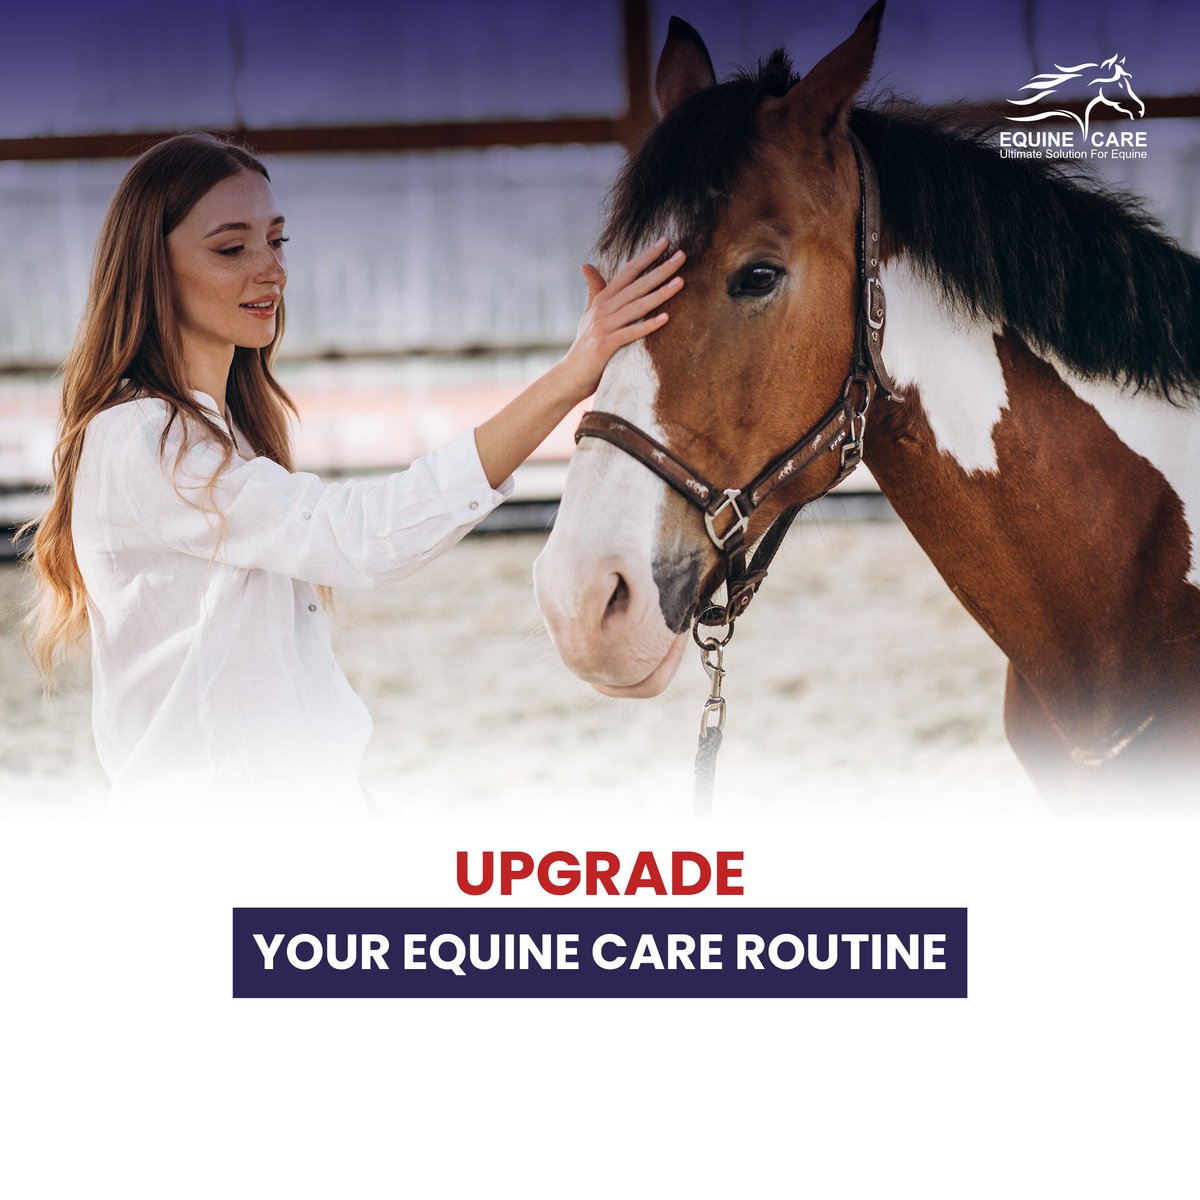 From essential farrier tools to comfortable tack and high-quality feed, we have everything you need to upgrade your equine care routine and invest in your horse's future.

#equinecare #horsecare #investinyourhorse #upgradeyourequinecare #holisticcare #healthyhorse #happyhorse